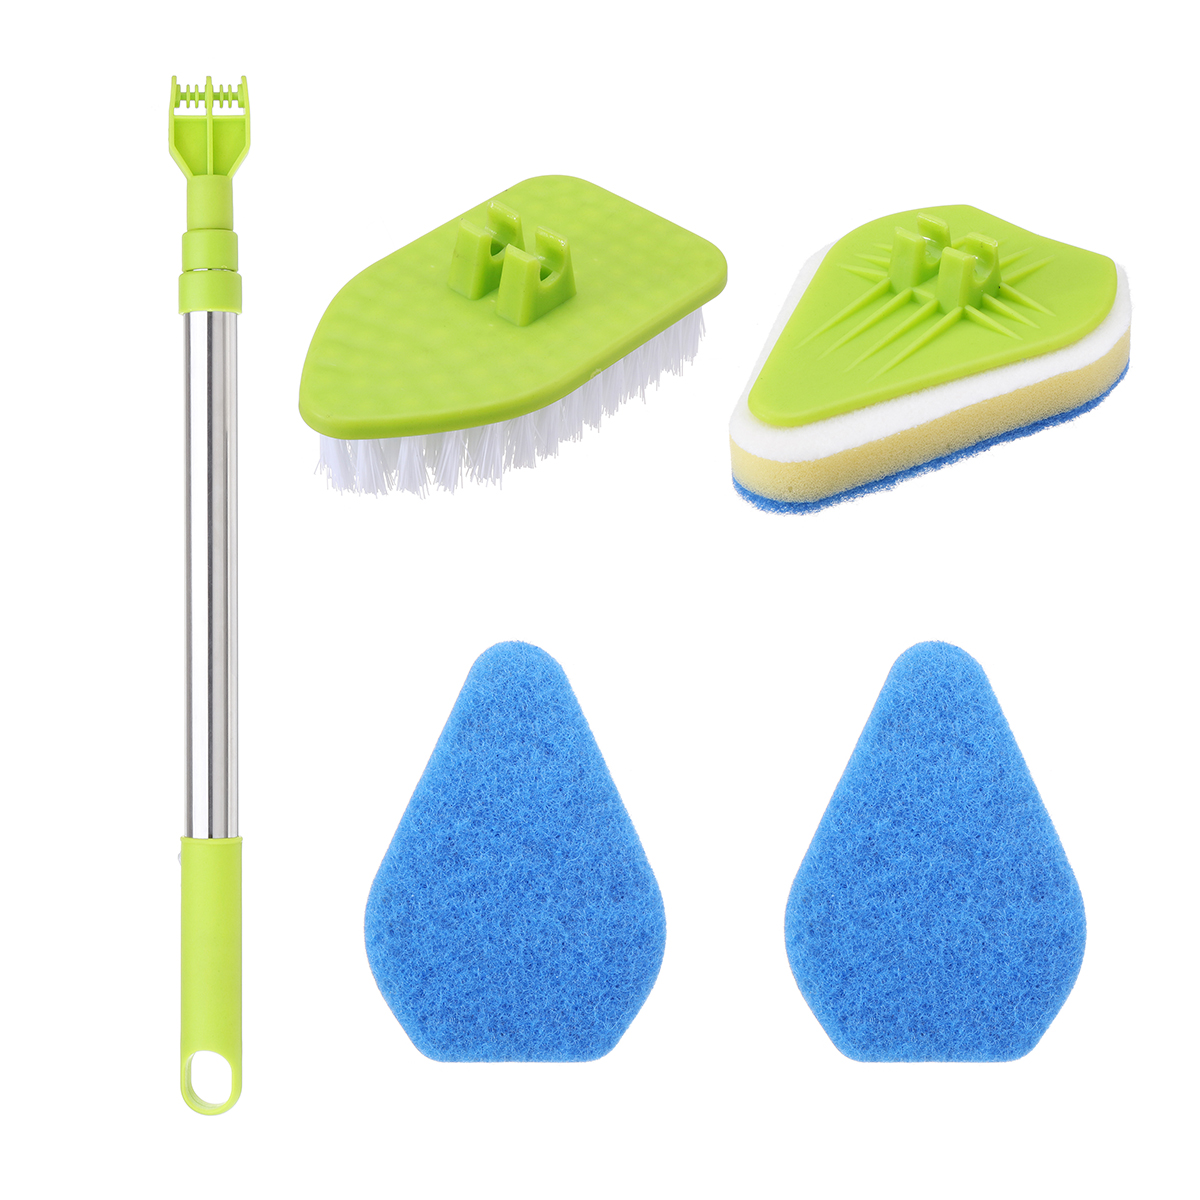 Length-and-Angel-Adjustable-Kitchen-Cleaning-Brushes-Quick-Installation-Multi-brush-Scrubber-Cleaner-1369842-10